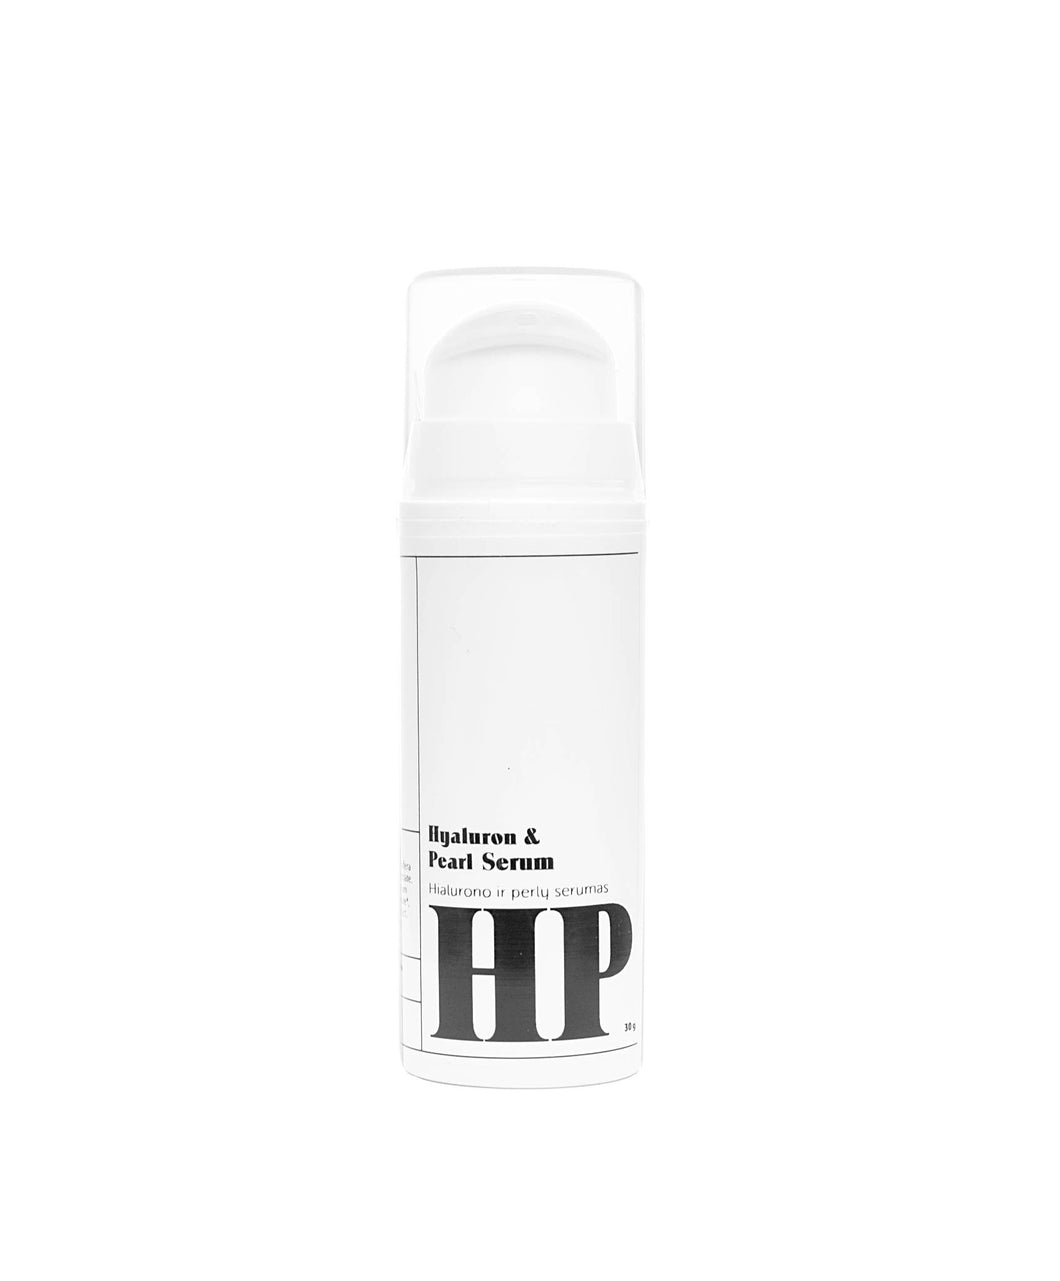 Hyaluronic acid and pearl serum, 30g.